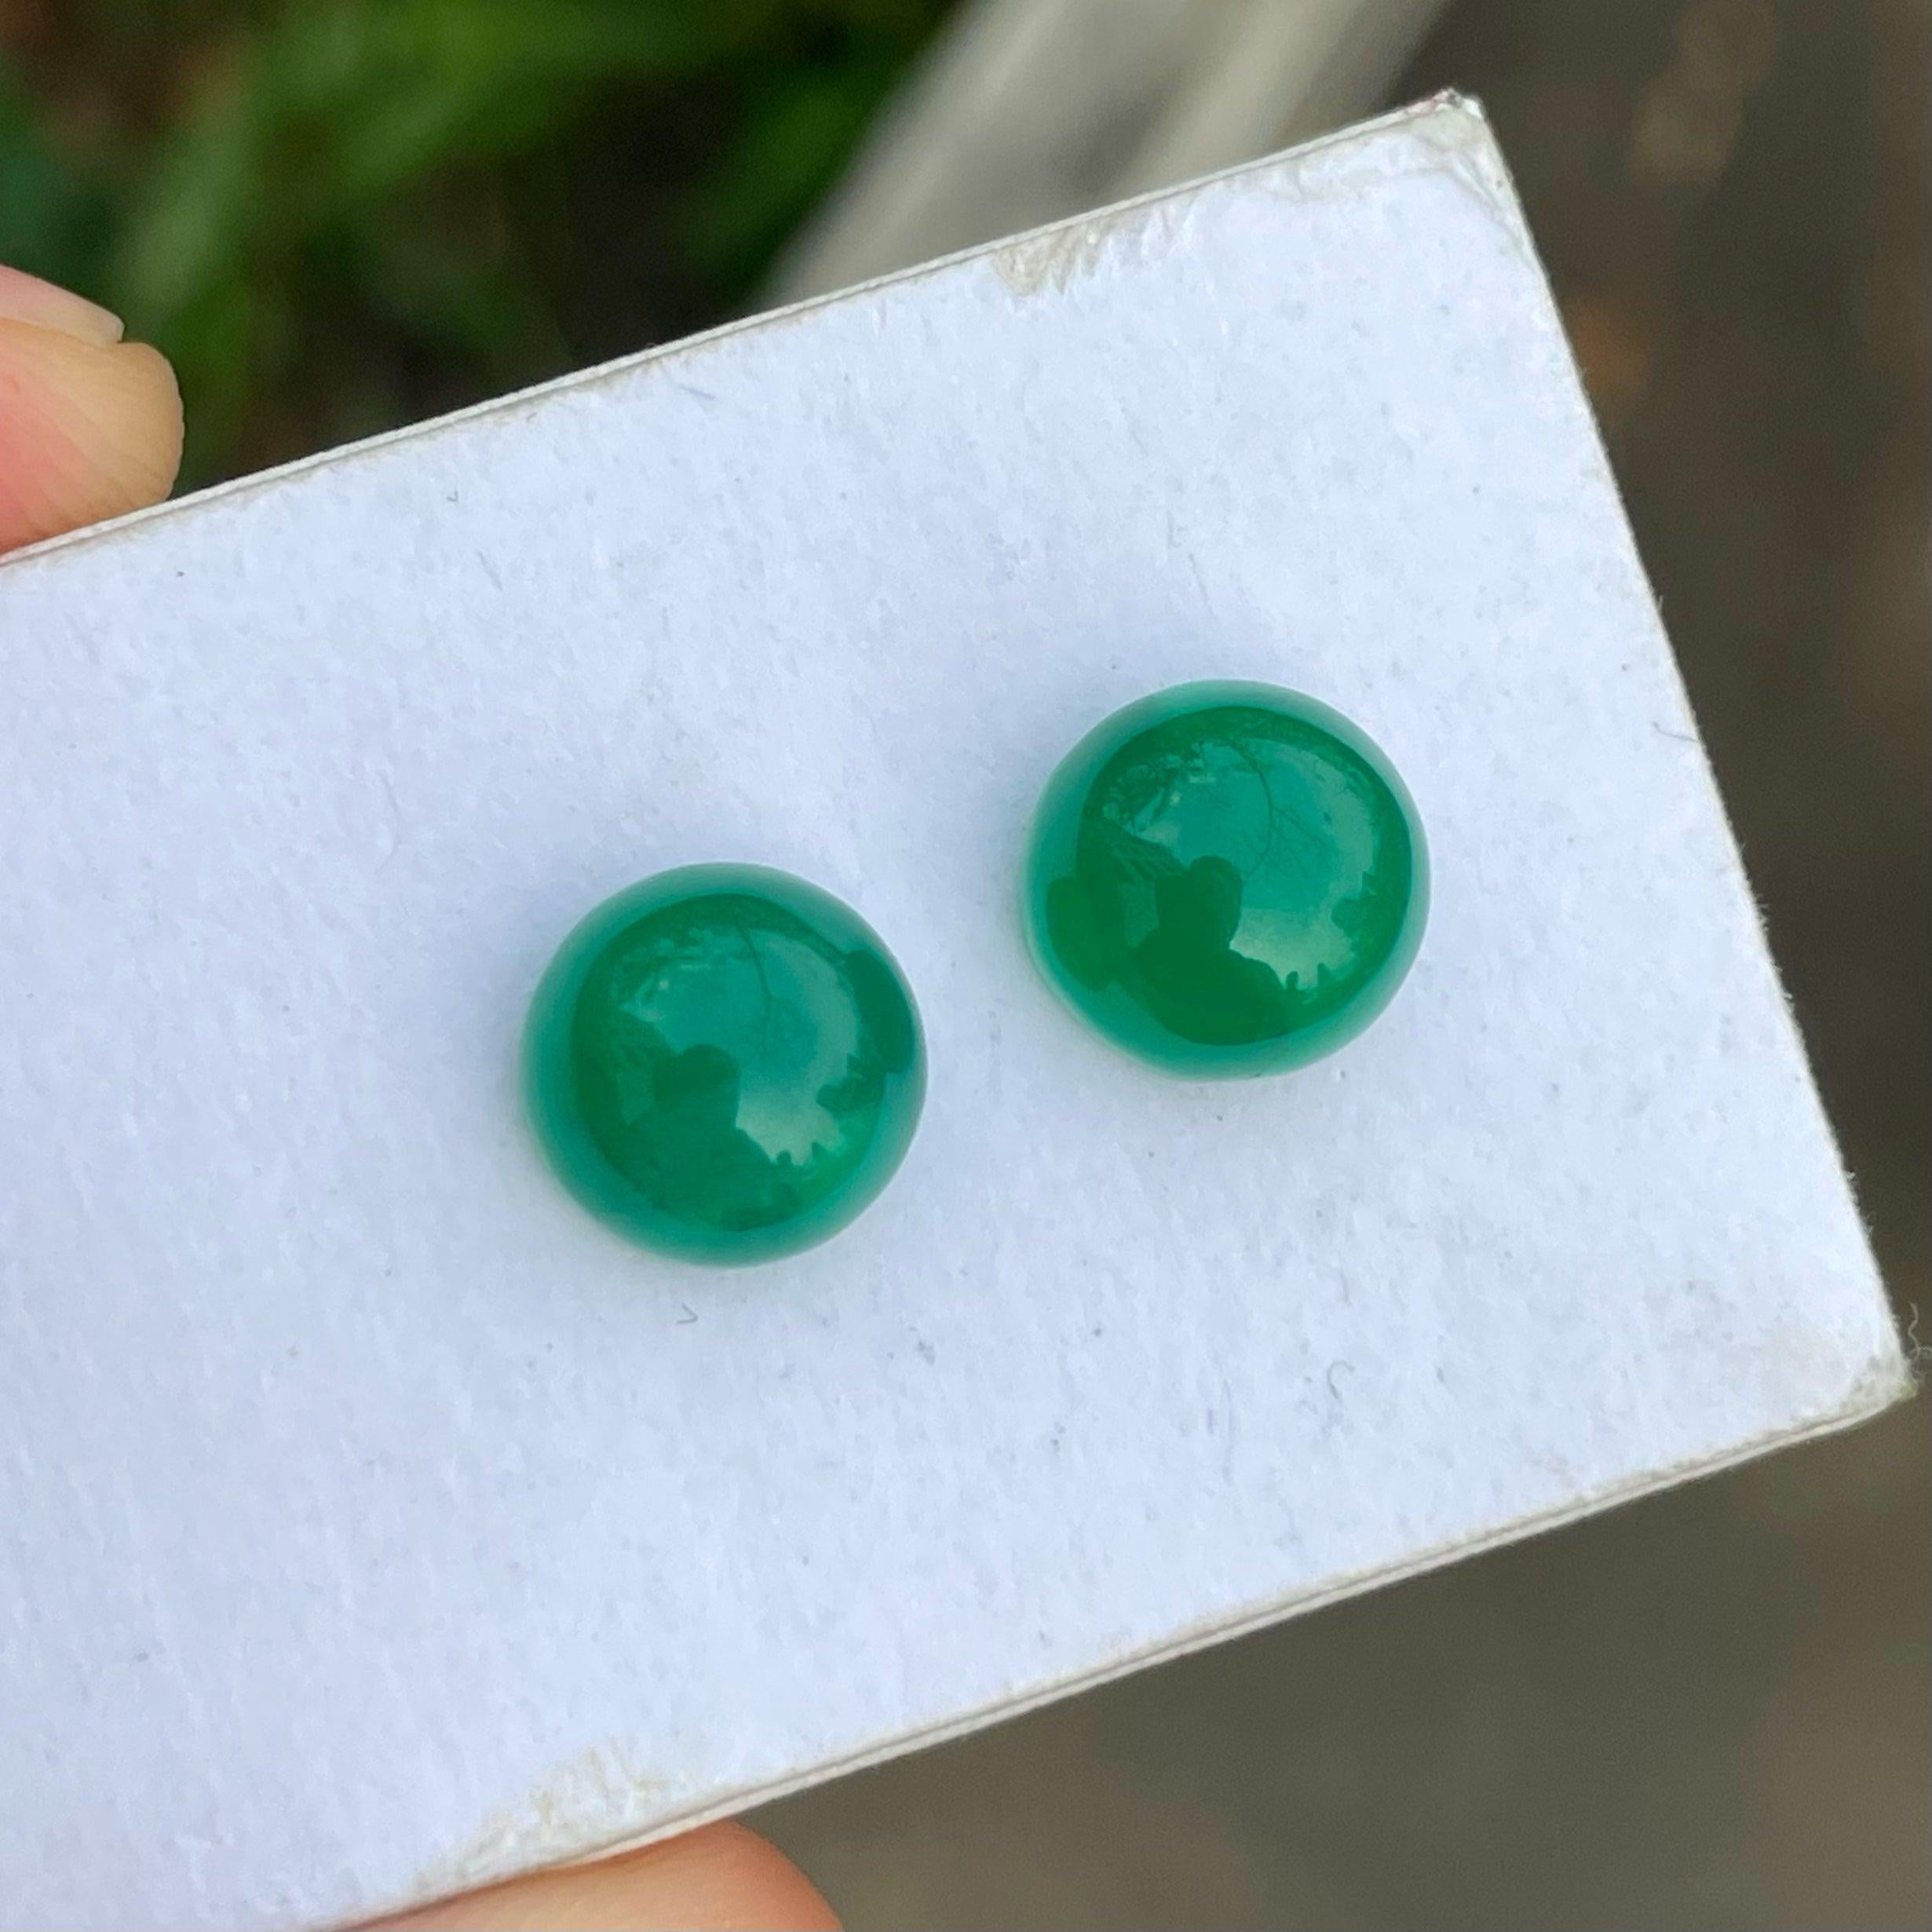 Beautiful Green Agate Pair Gemstone, available for sale at wholesale price, natural high-quality 7.25 carats flawless Transparency Translucent clarity, certified Moonstone from India.

Product Information:
GEMSTONE NAME: Beautiful Green Agate Pair